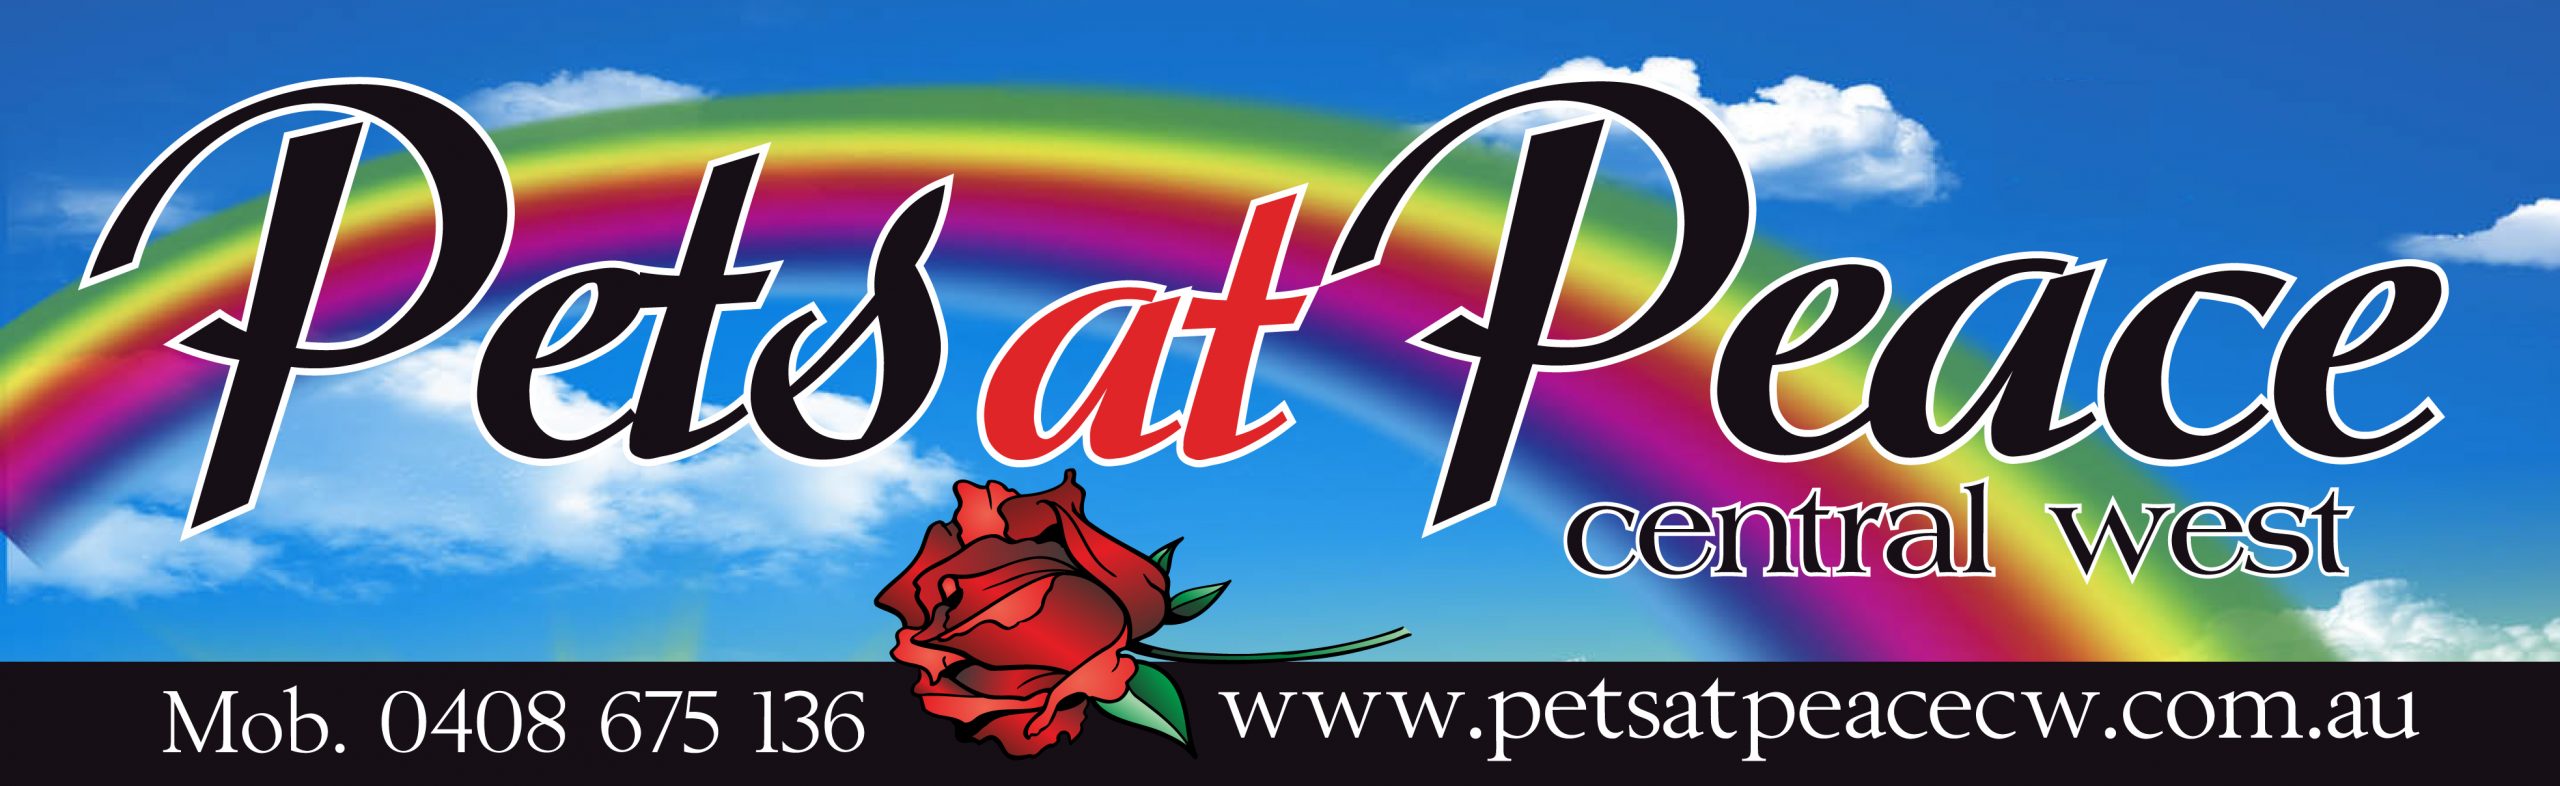 Pets at Peace Central West